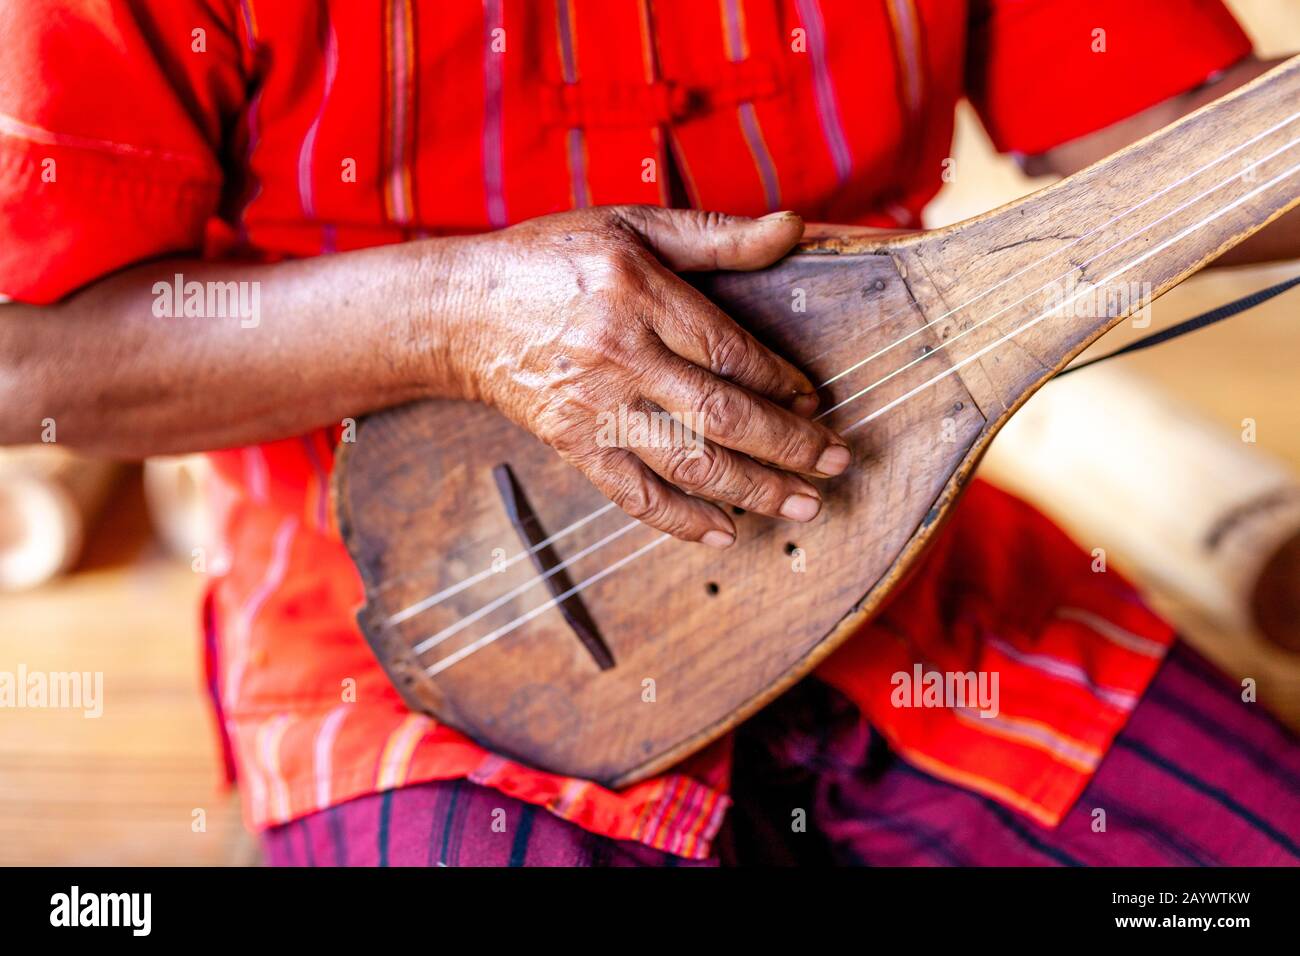 A Man From The Kayah Ethnic Group Playing A Guitar Like Instrument, Hta Nee La Leh Village, Loikaw, Kayah State, Myanmar. Stock Photo